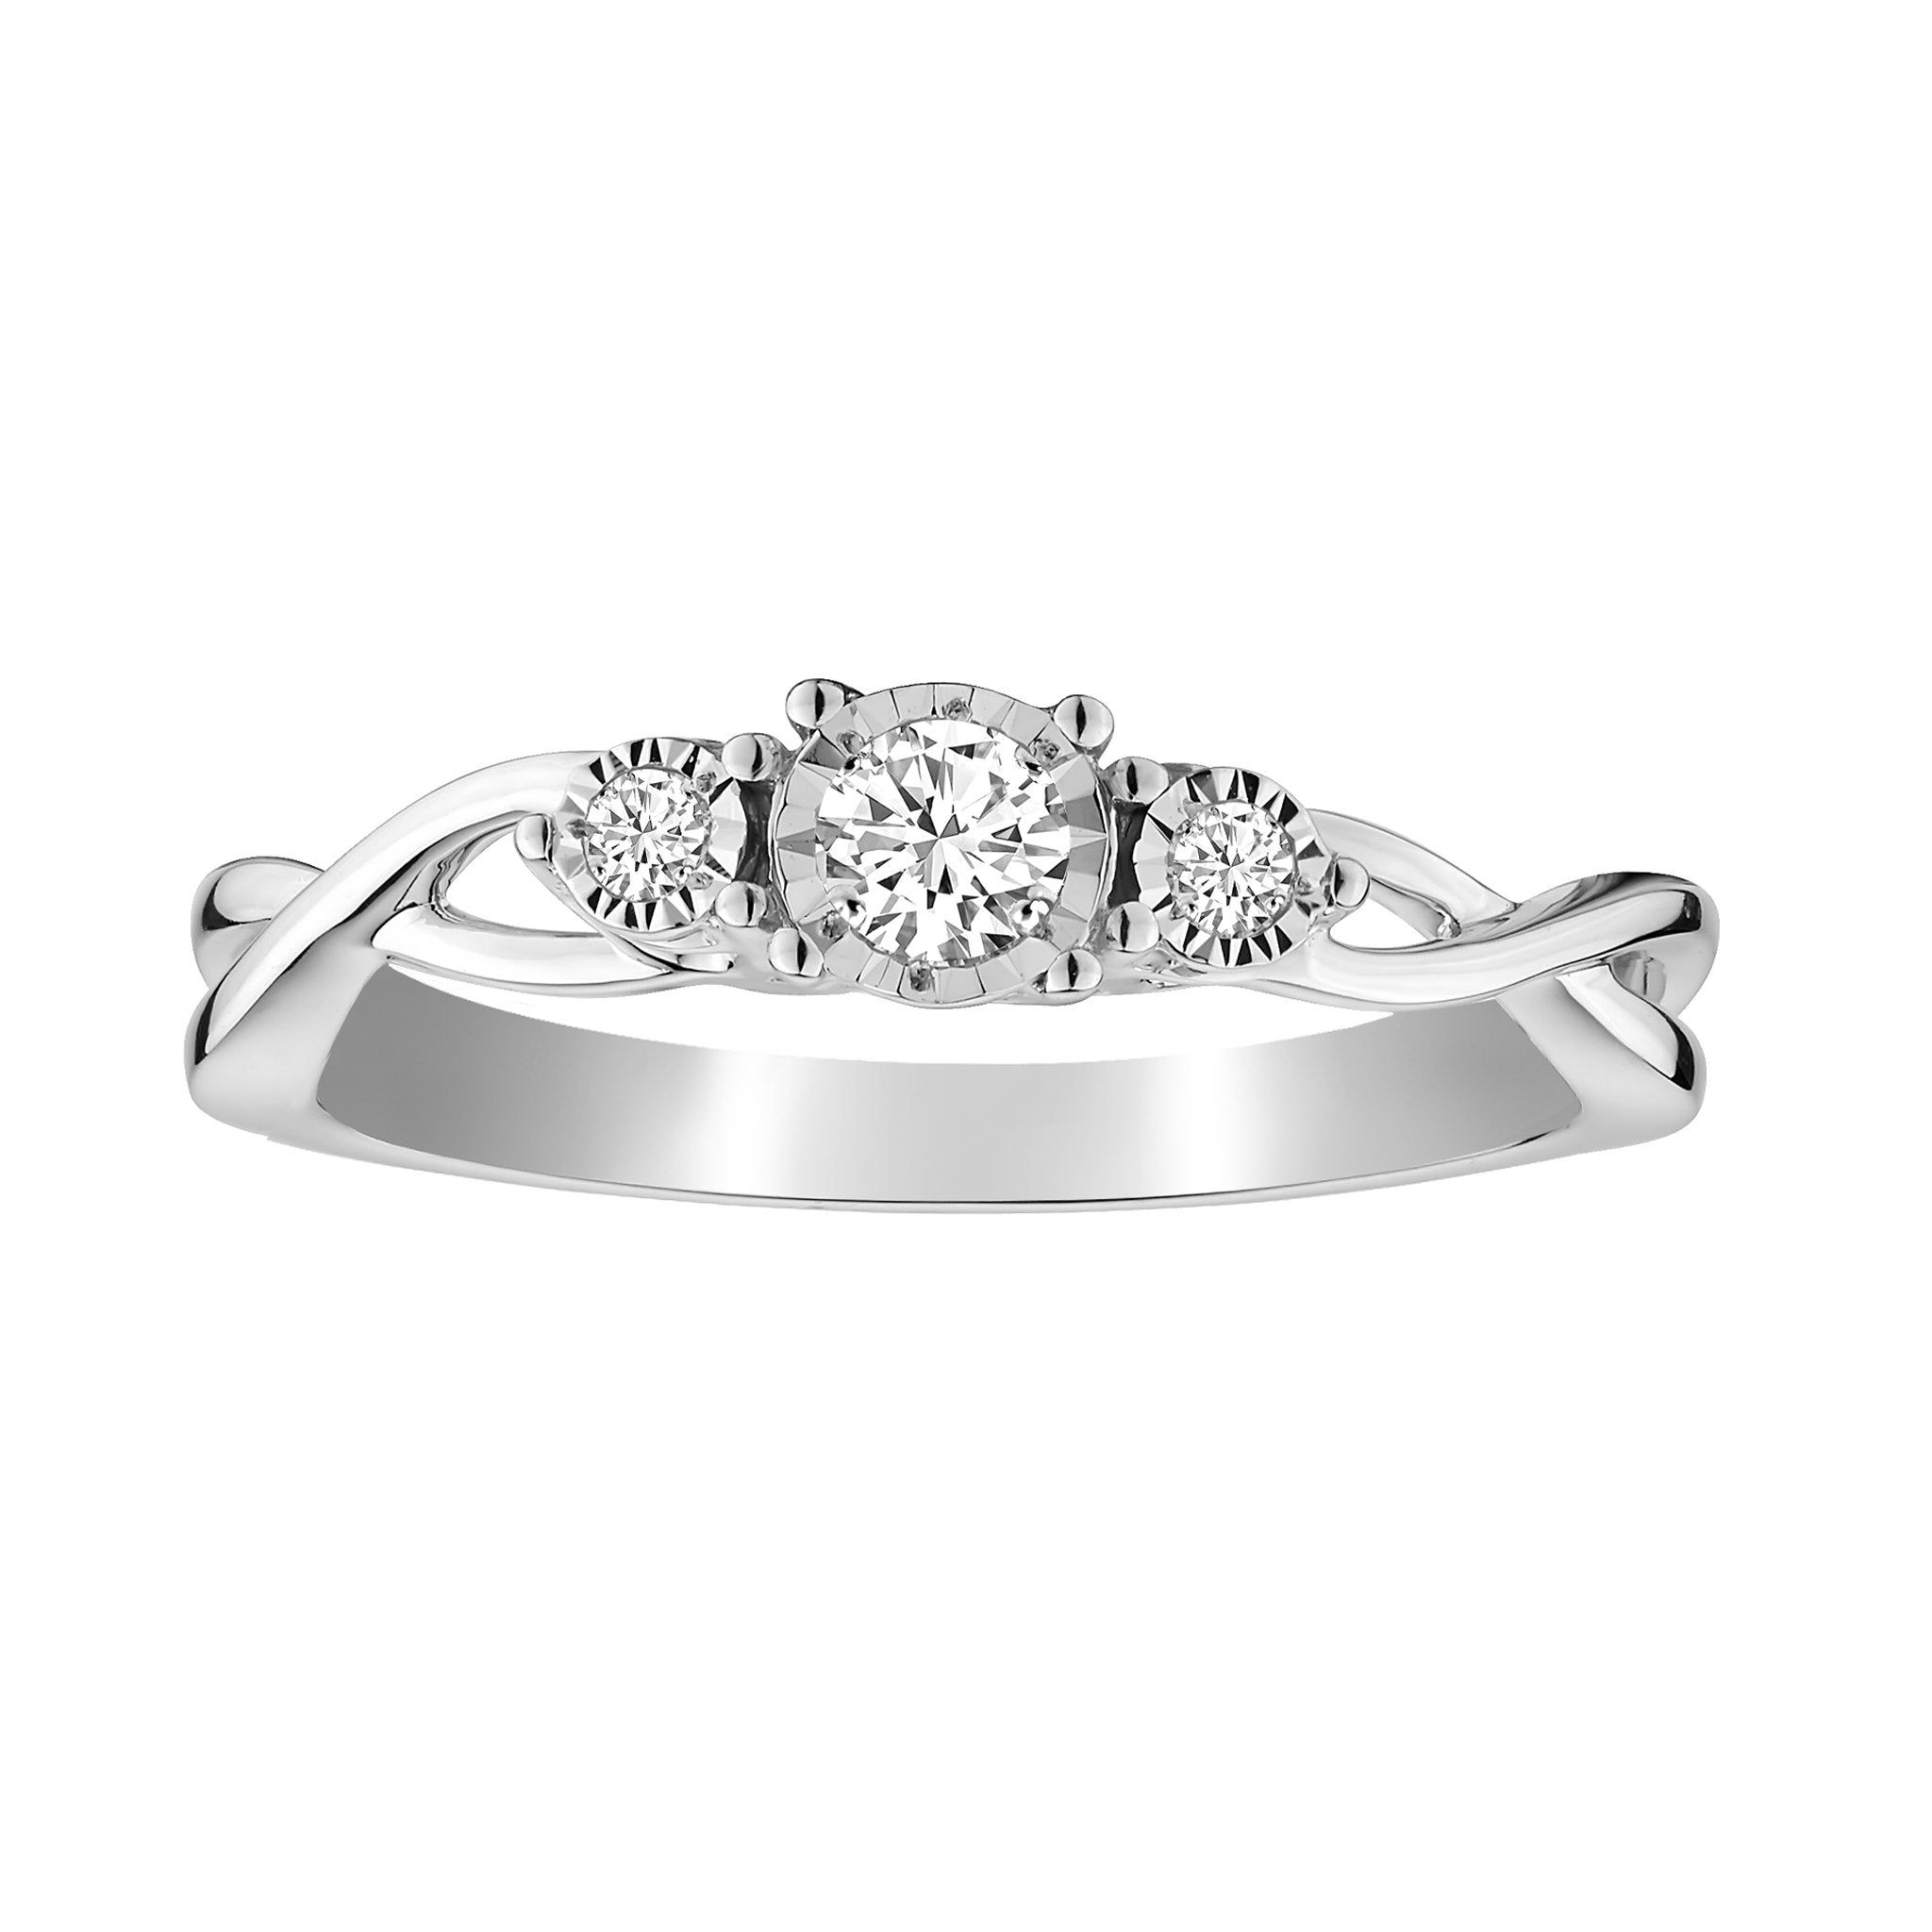 .20 Carat of Diamonds "Past, Present, Future" Ring, 10kt White Gold.....................NOW